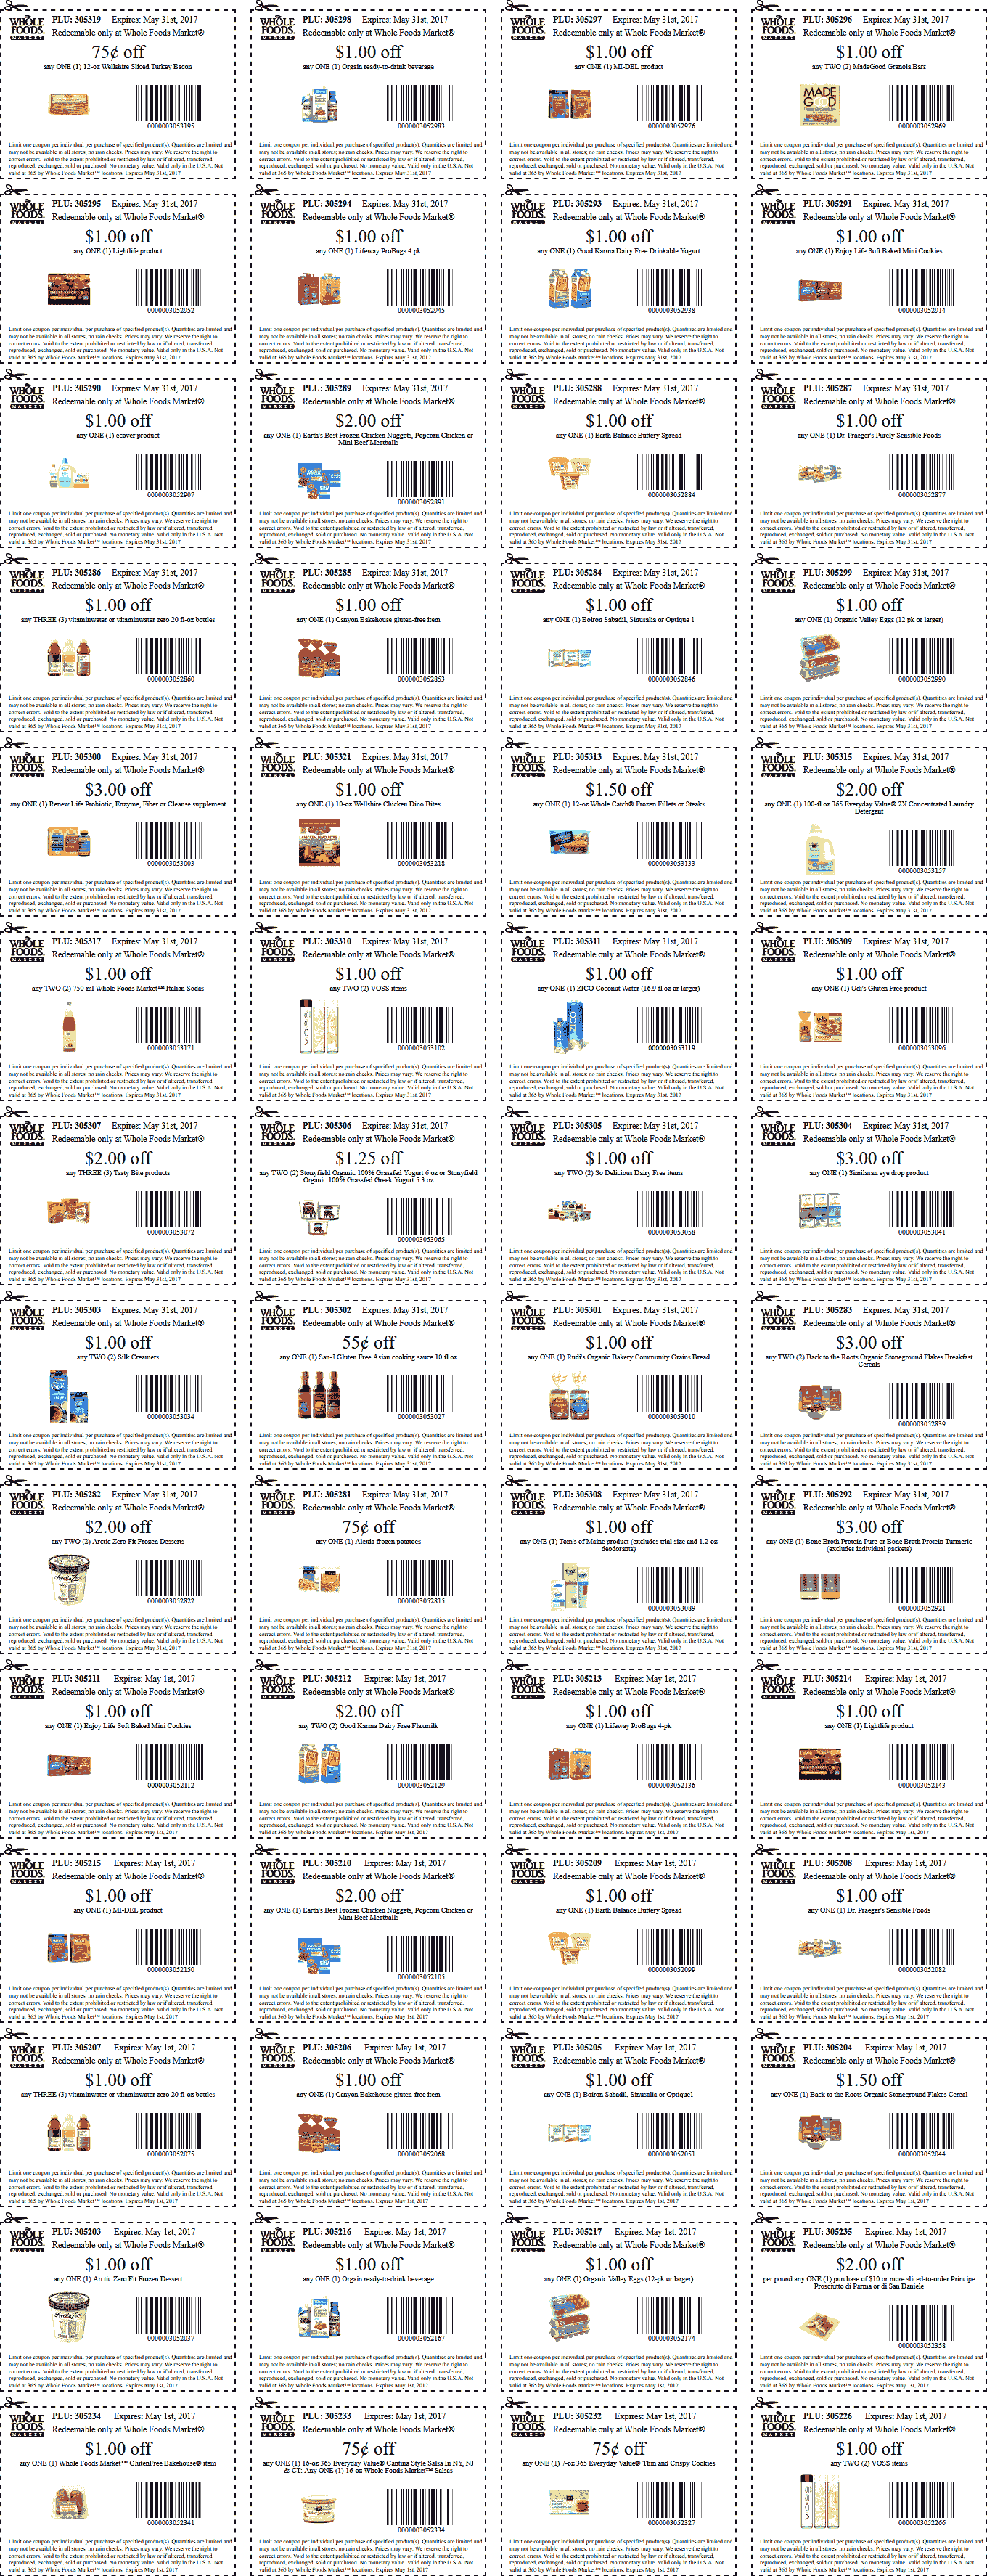 Whole Foods Coupon April 2024 Various coupons for Whole Foods market